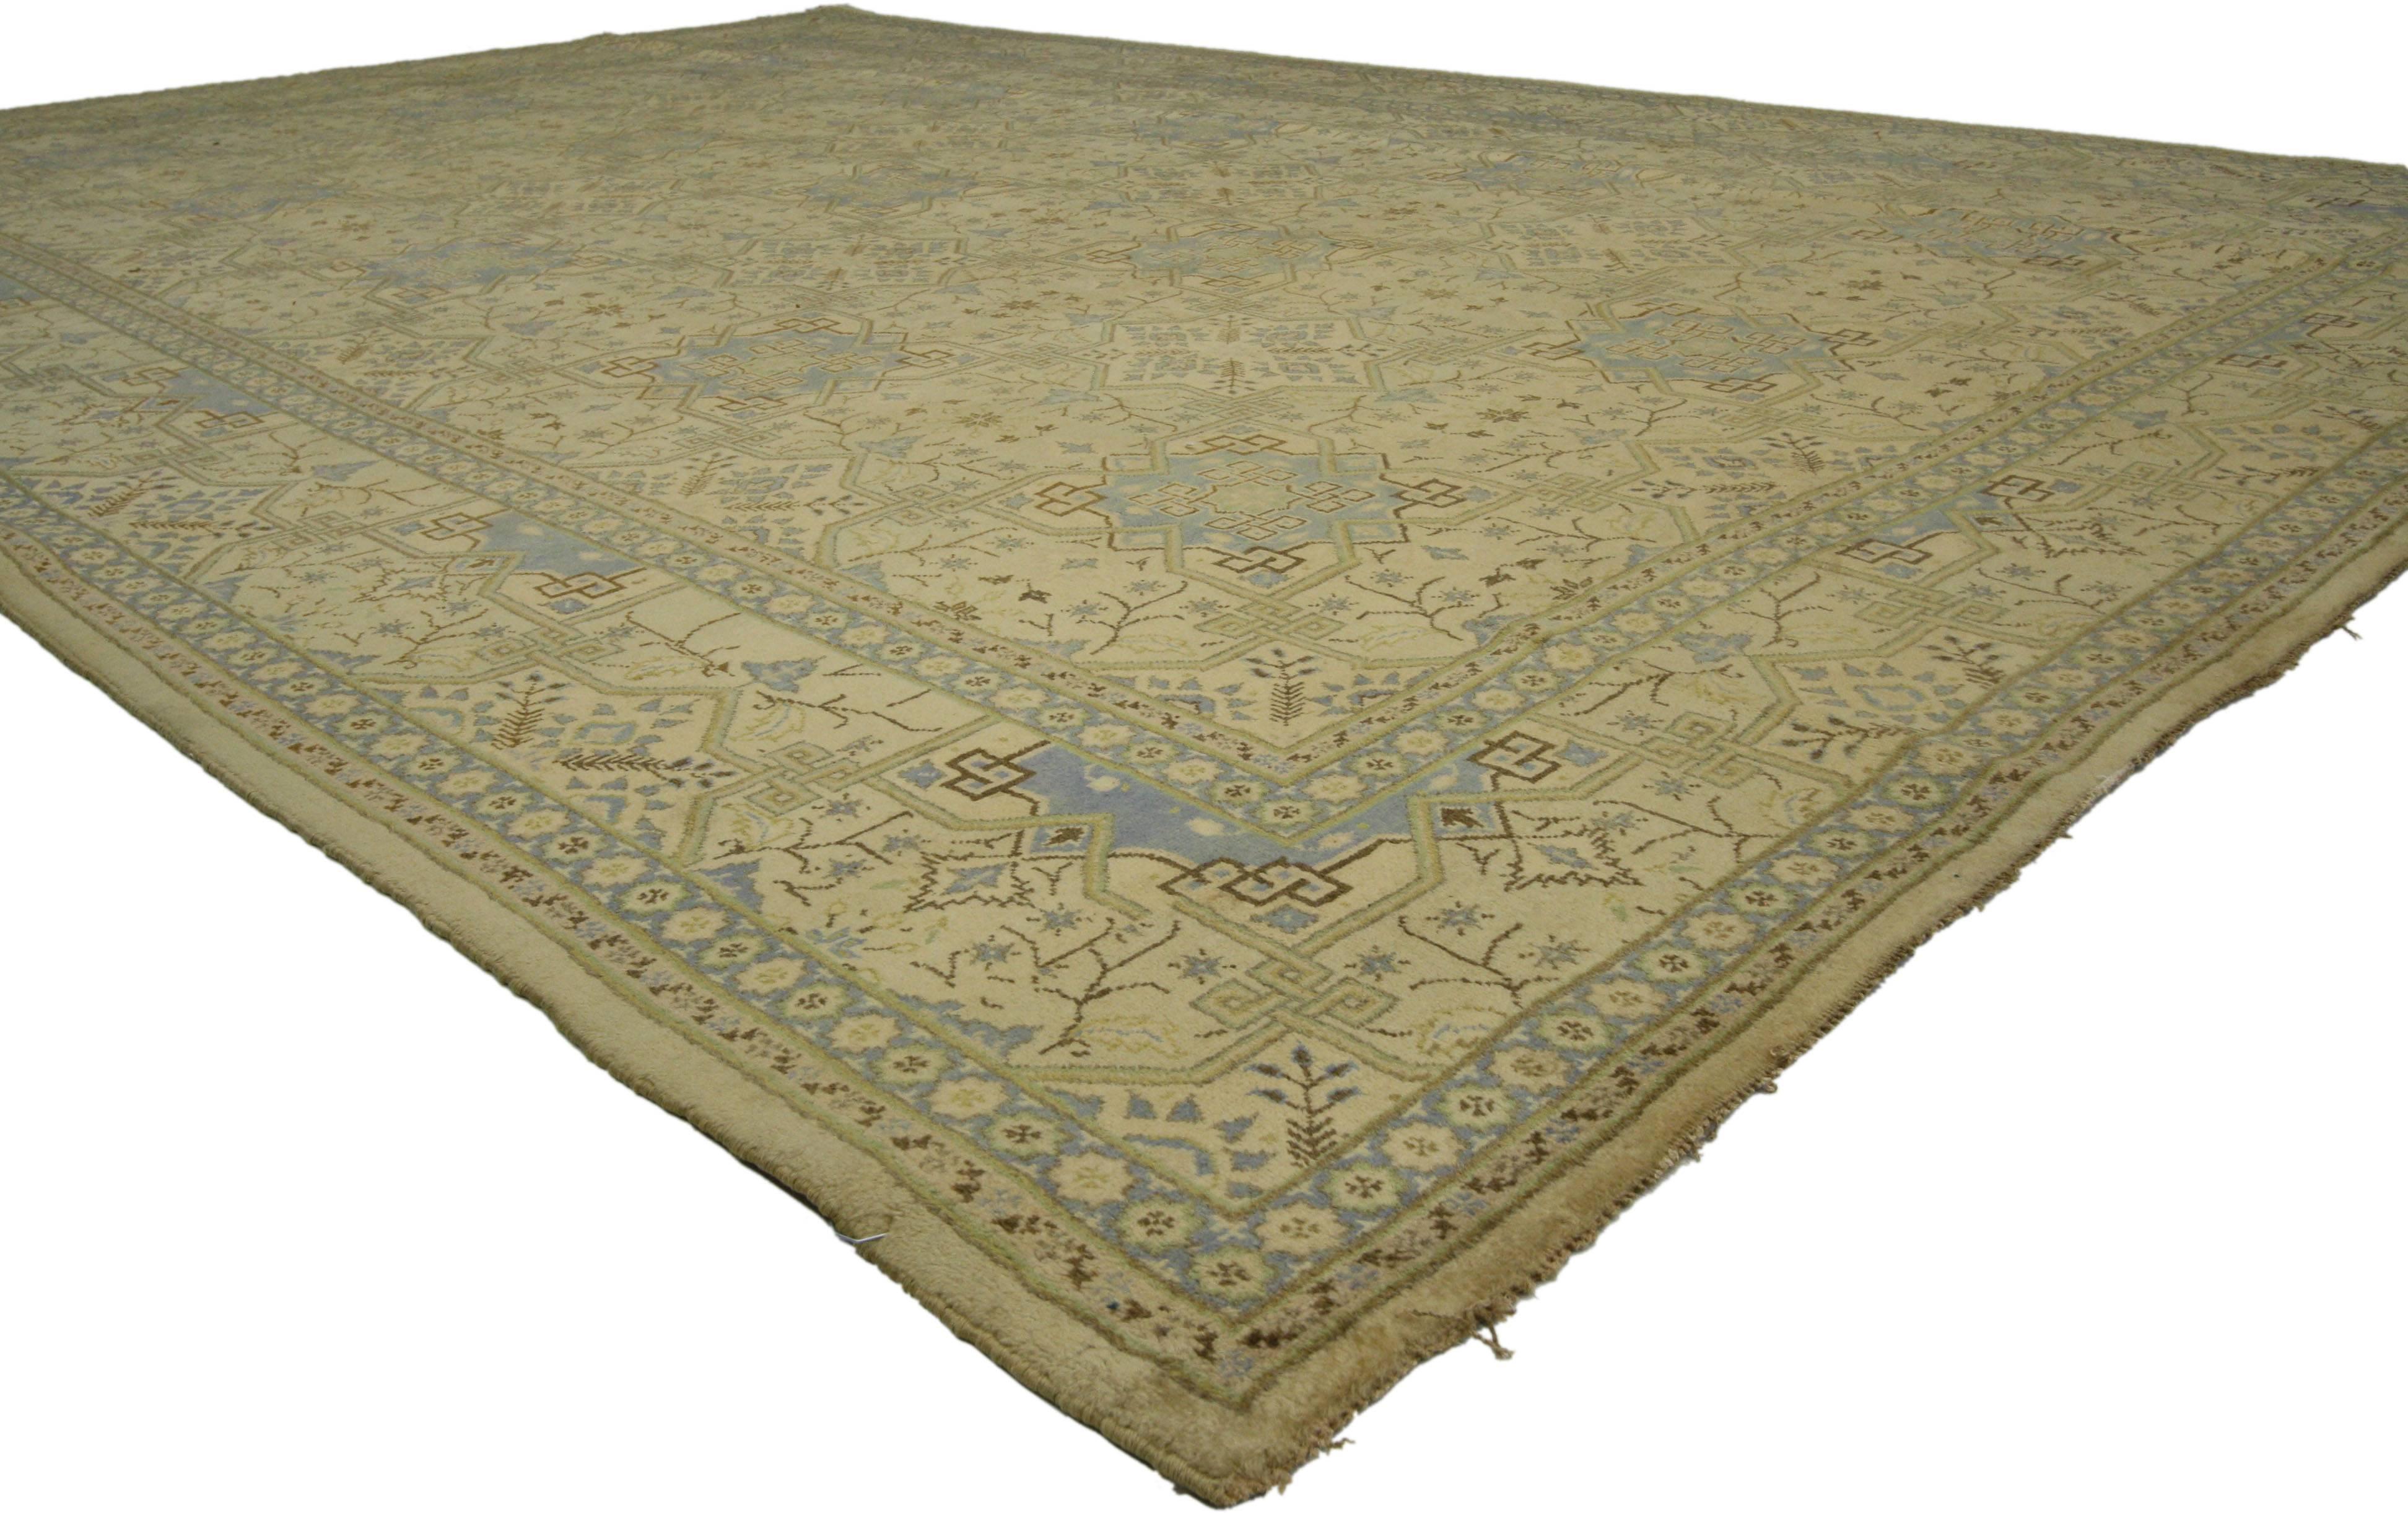 75179, Vintage Persian Kashan Rug with Traditional Style. Warm and inviting with ornate details, this hand knotted wool vintage Persian Kashan rug is poised to impress. The tan colored field is covered in a well-balanced all-over geometric design